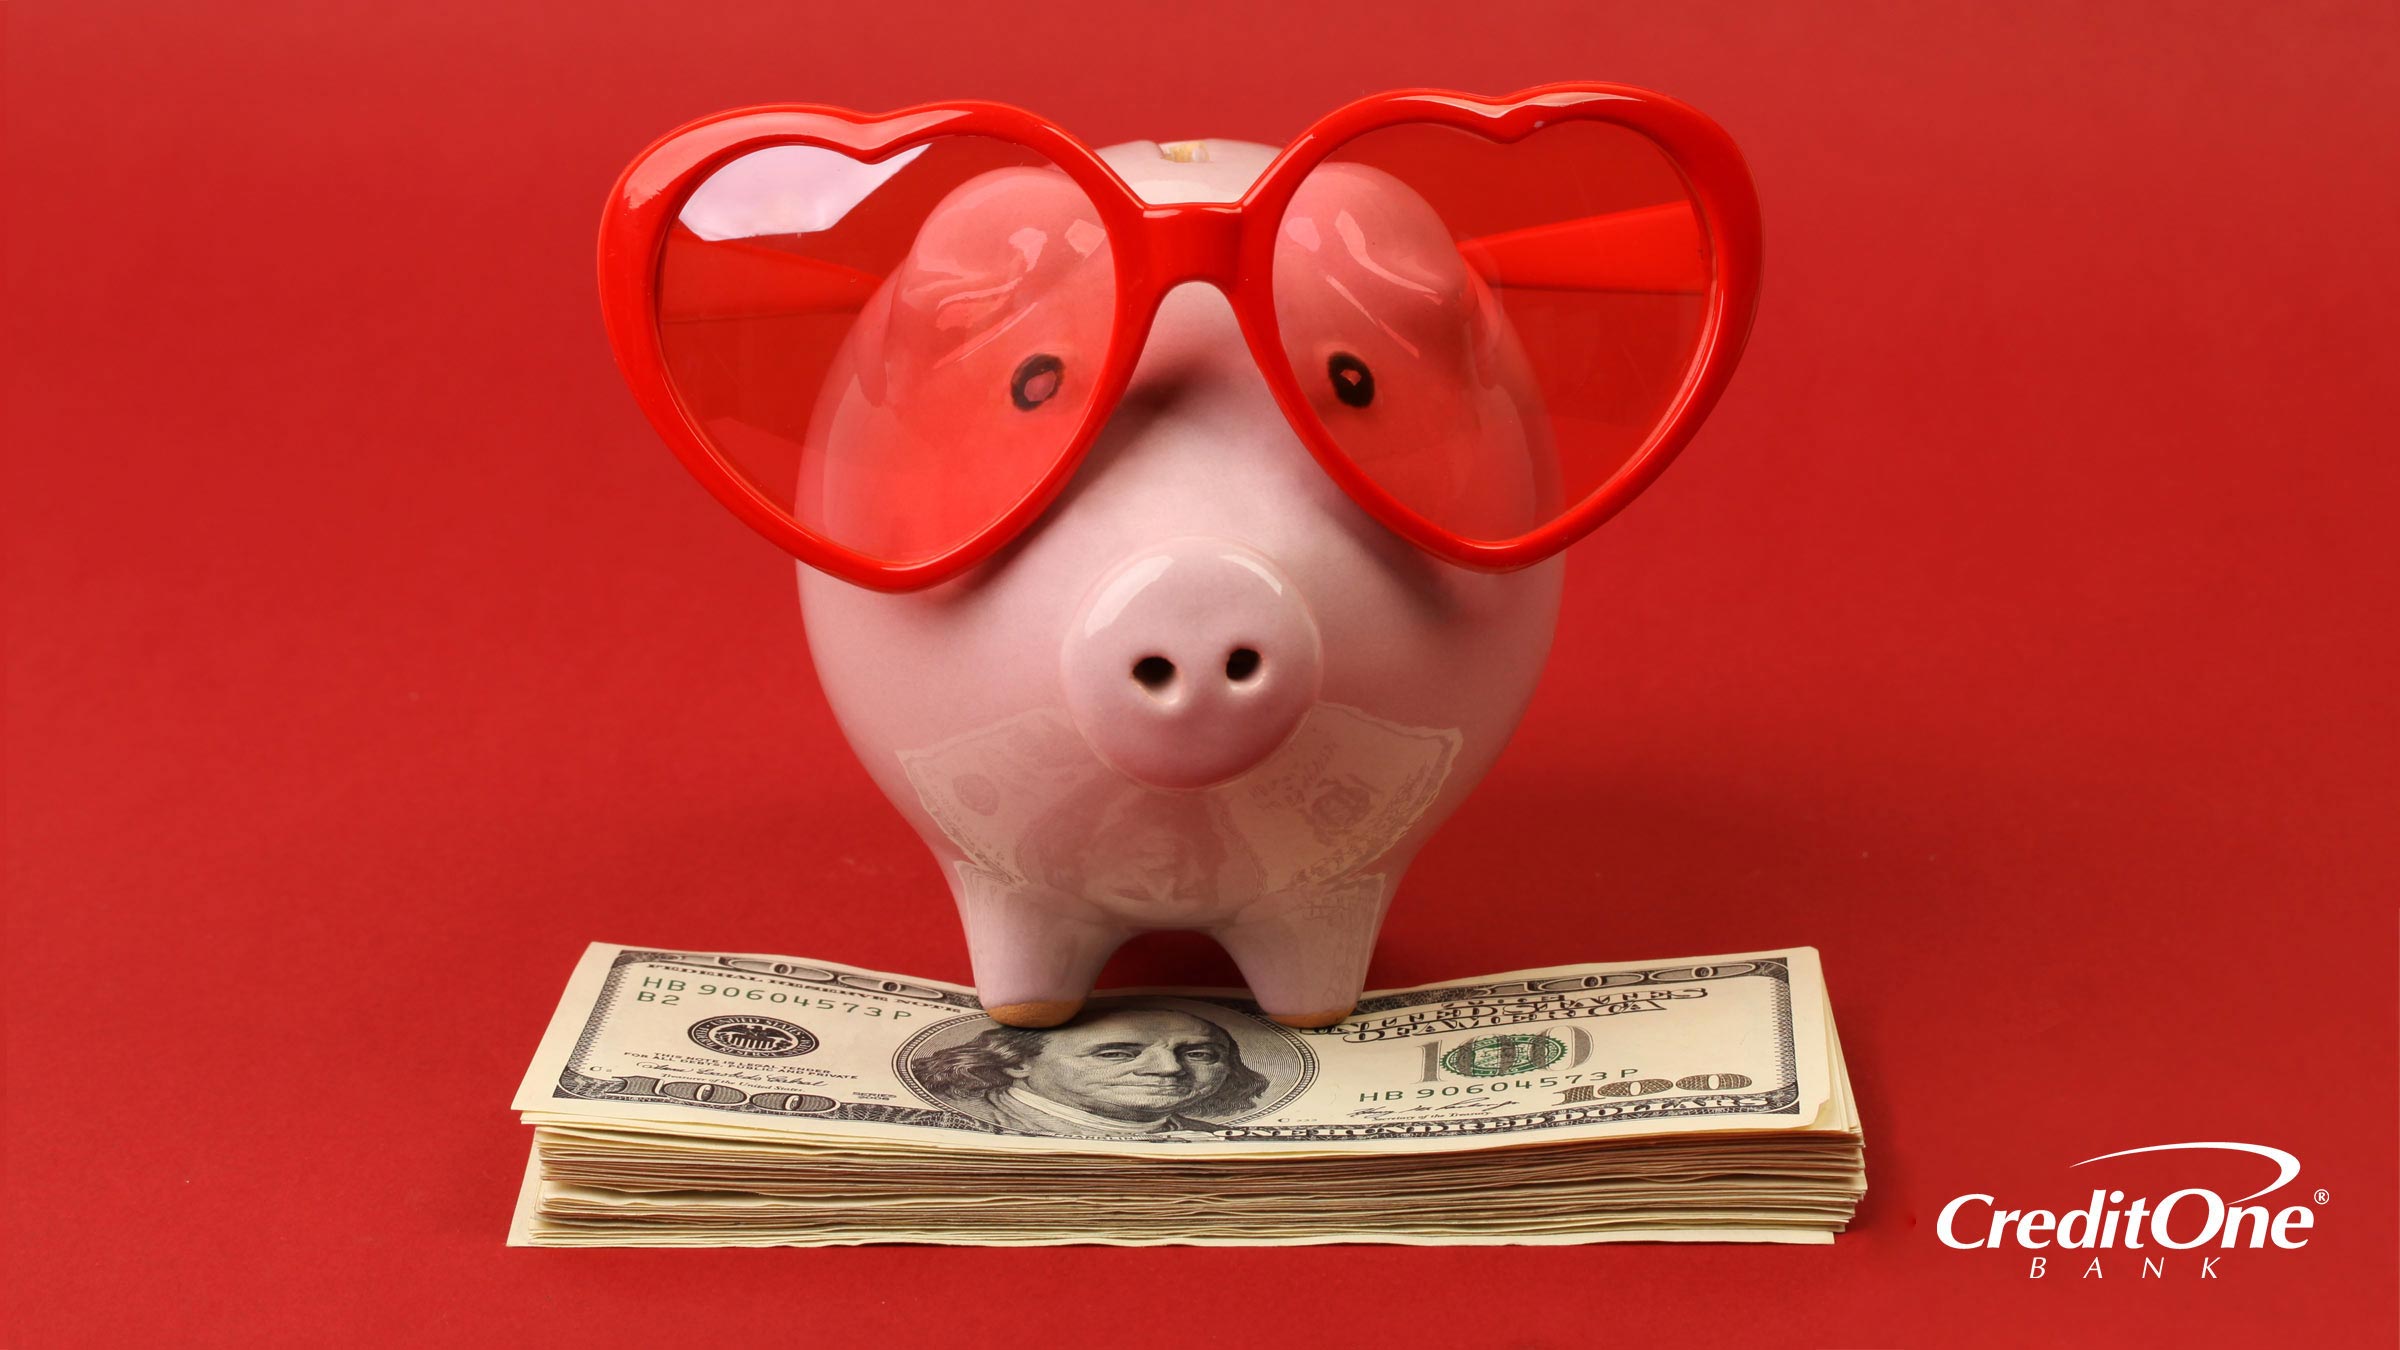 A ceramic piggy bank with heart-shaped glasses sitting on a pile of money